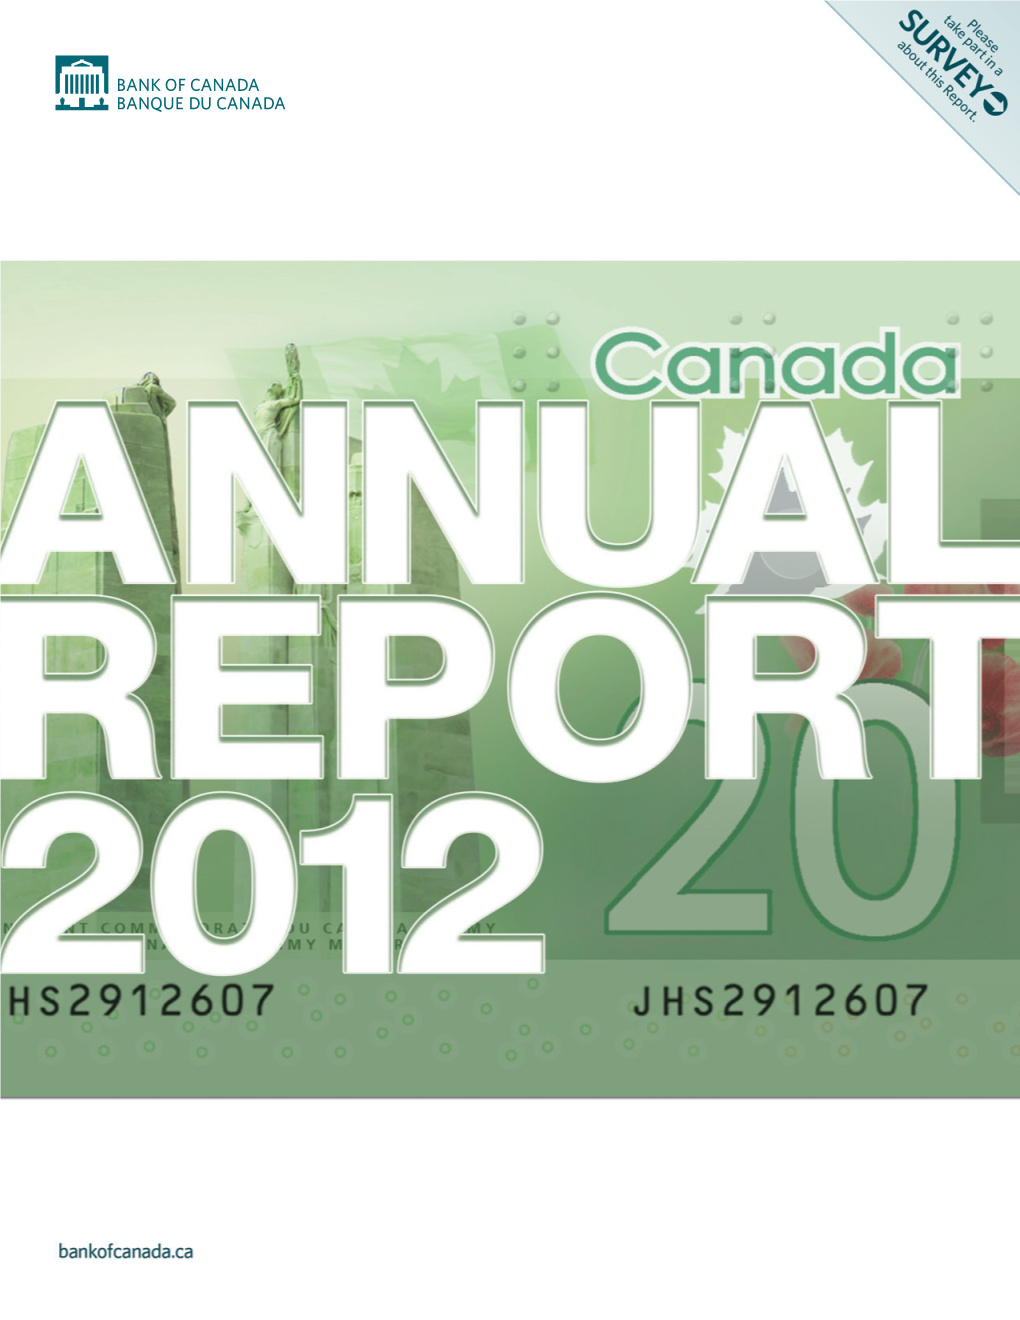 Annual Report 2012 the Annual Report Is Available on the Bank of Canada’S Website at Bankofcanada.Ca